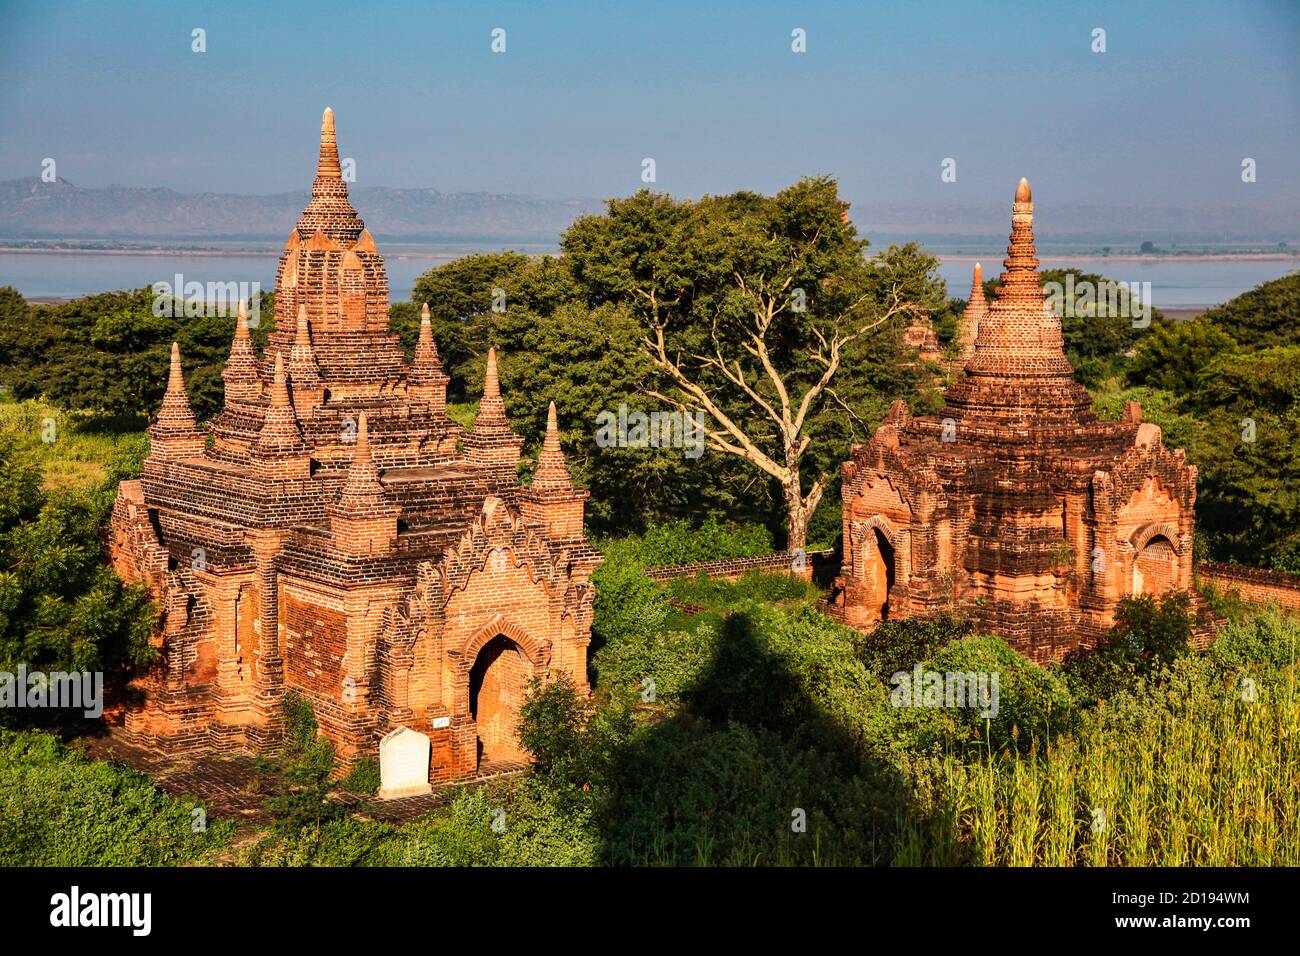 Pagodas and temples of Bagan in Myanmar, formerly Burma, a world heritage site in Asia Stock Photo